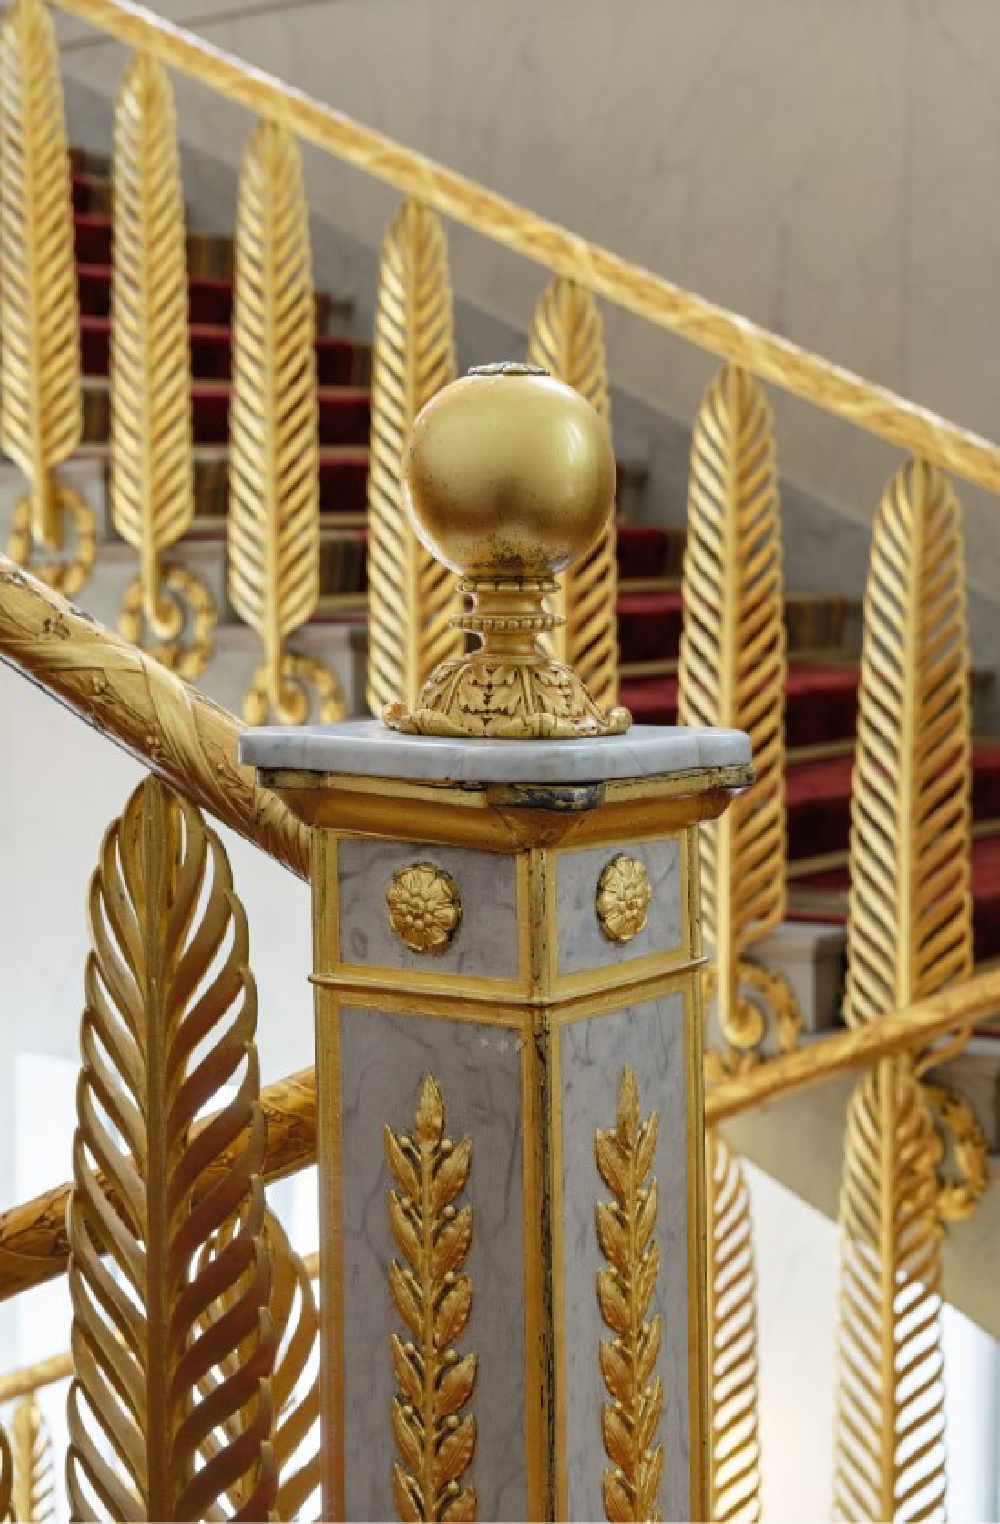 Élysée Palace main staircase banister of upright palm leaves rising from rosettes set within olive wreaths is made of bronze- and gold-plated lead. Photo by Ambroise Tézenas from Presidential Residences in France (Flammarion 2021)